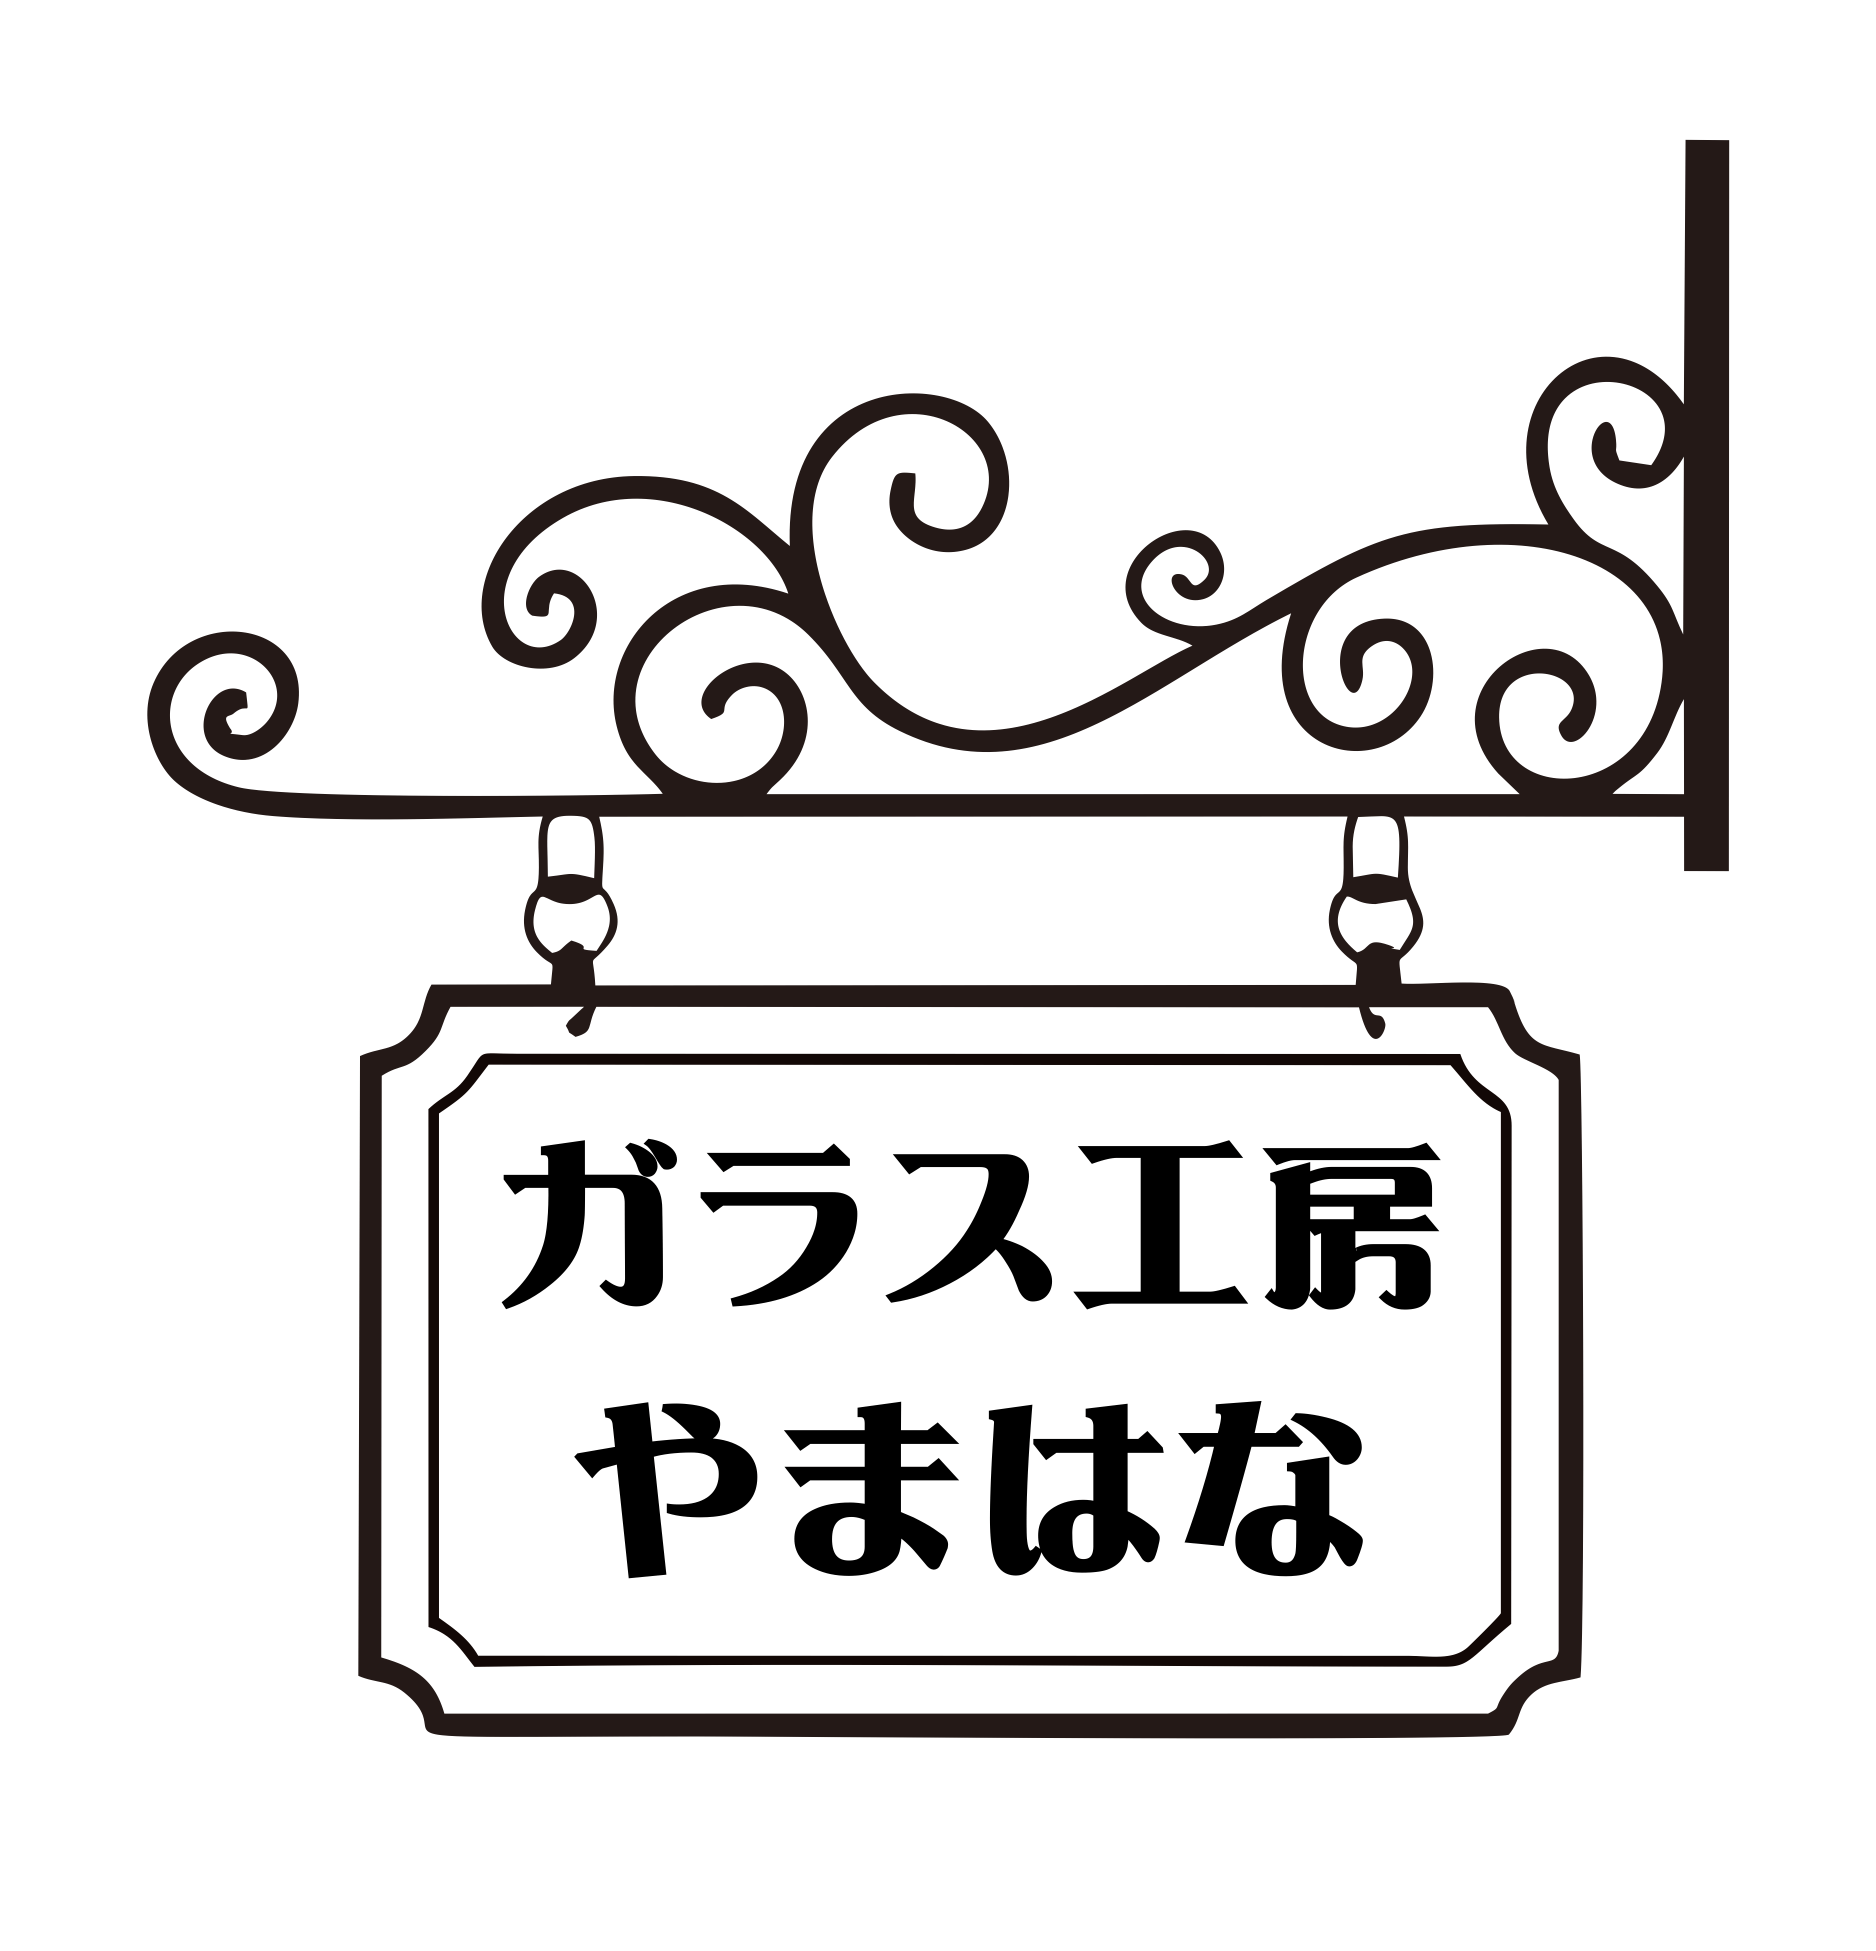 About 戦国武将 ありがとう 感謝